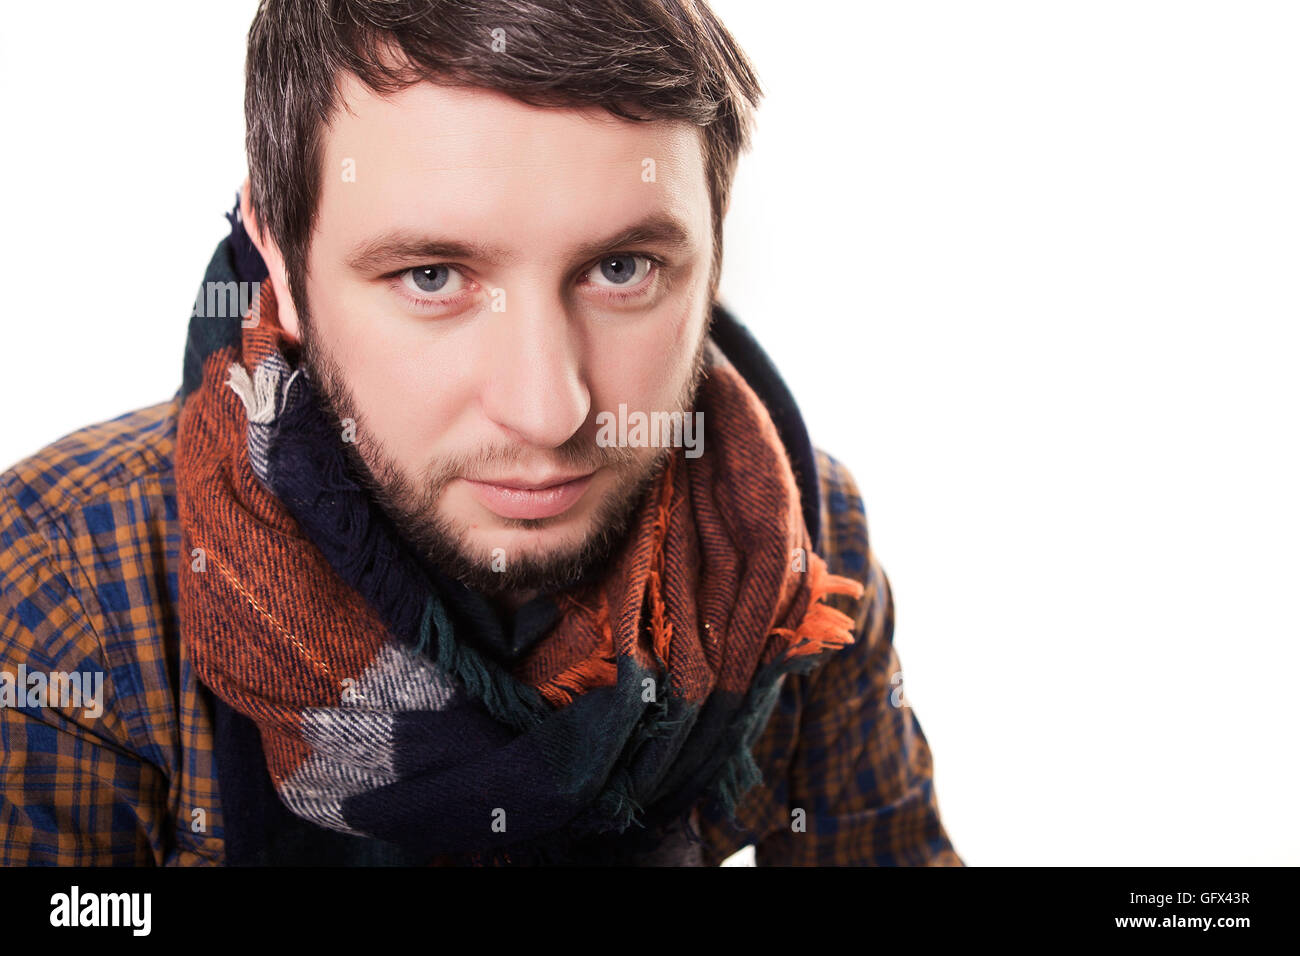 Man Cold . Ill young man with red nose, scarf, sneezing into handkerchief. Medication or drugs abuse, healthcare concept. Stock Photo